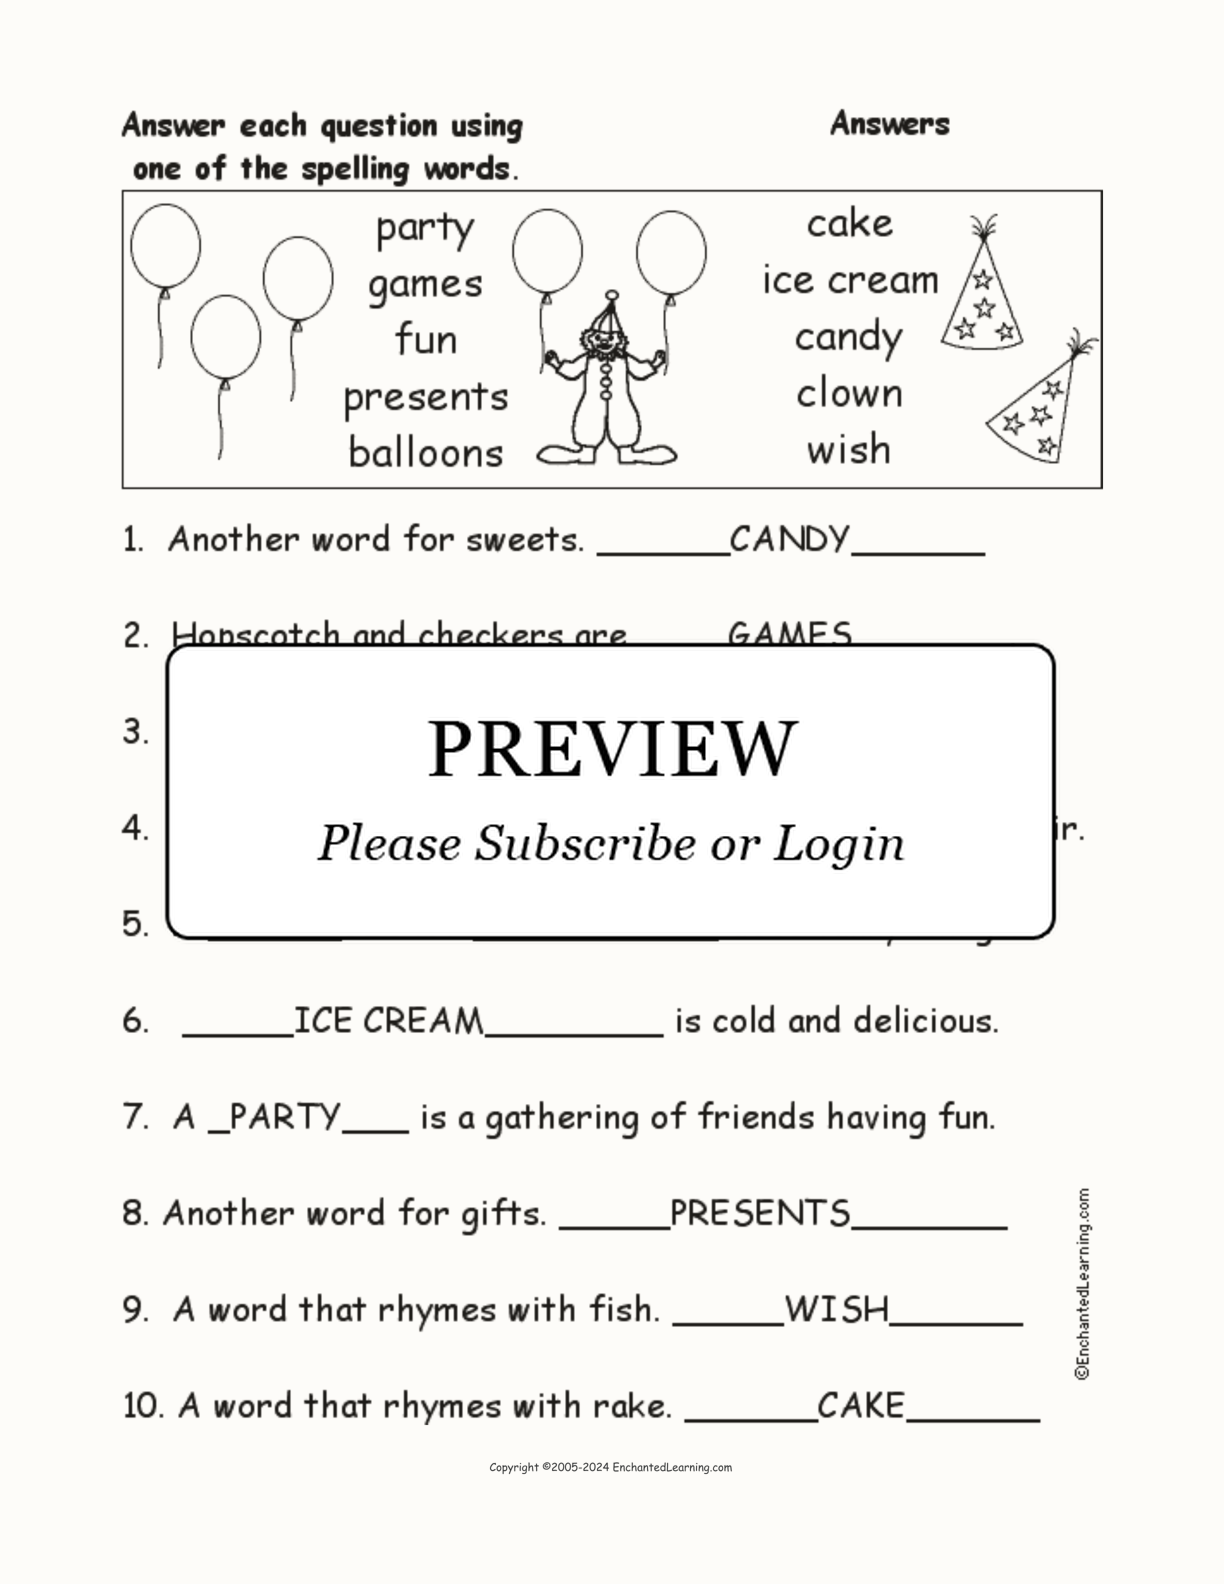 Birthday Spelling Word Questions interactive worksheet page 2